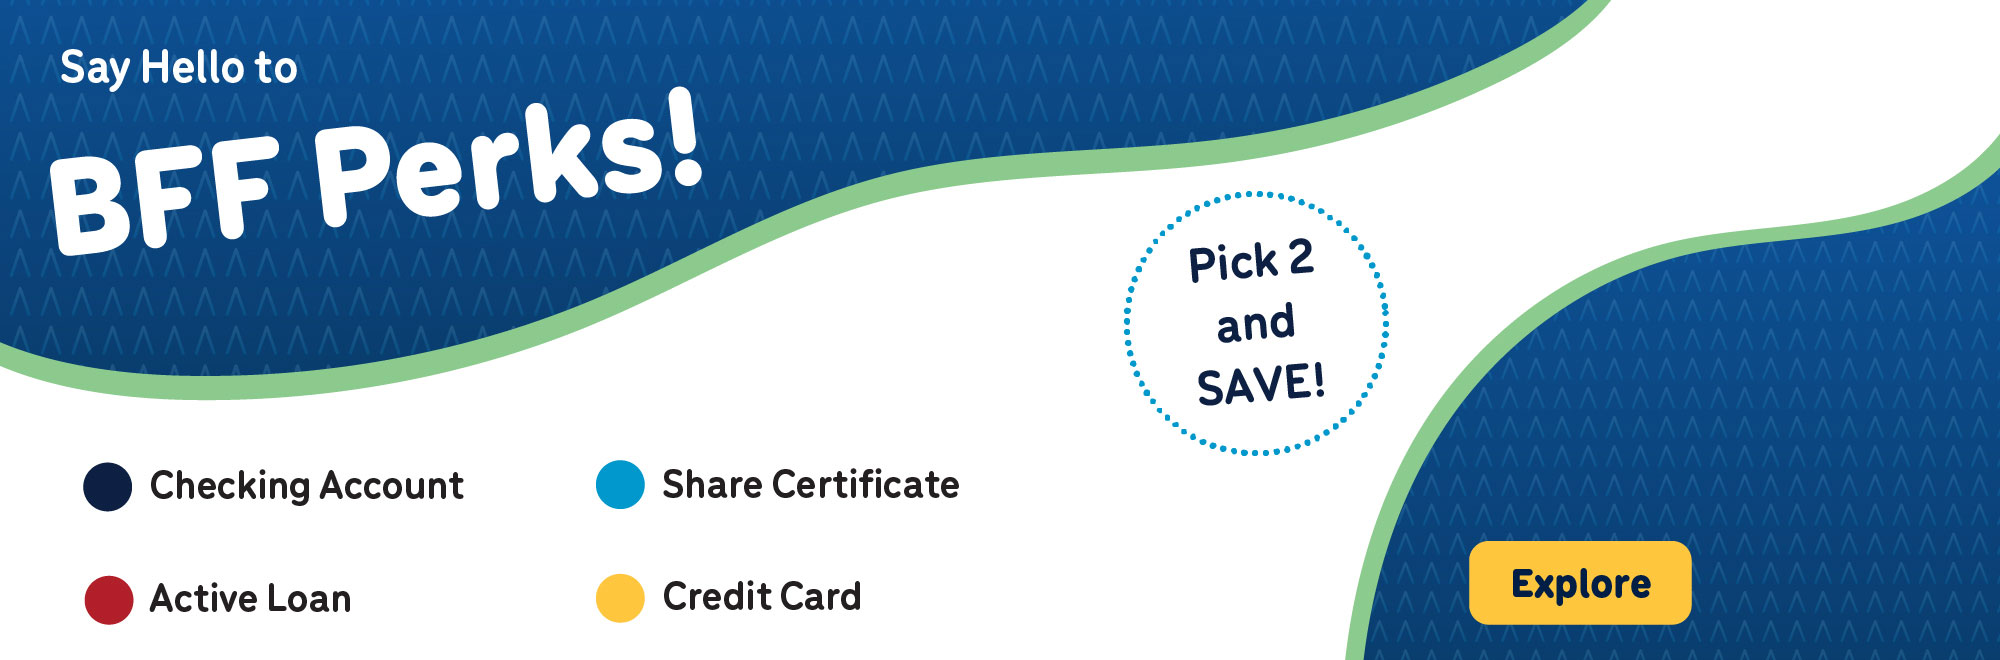 Checking Account, Share Certificate, Active Loan, Credit Card. Pick 2 and save with BFF Perks.